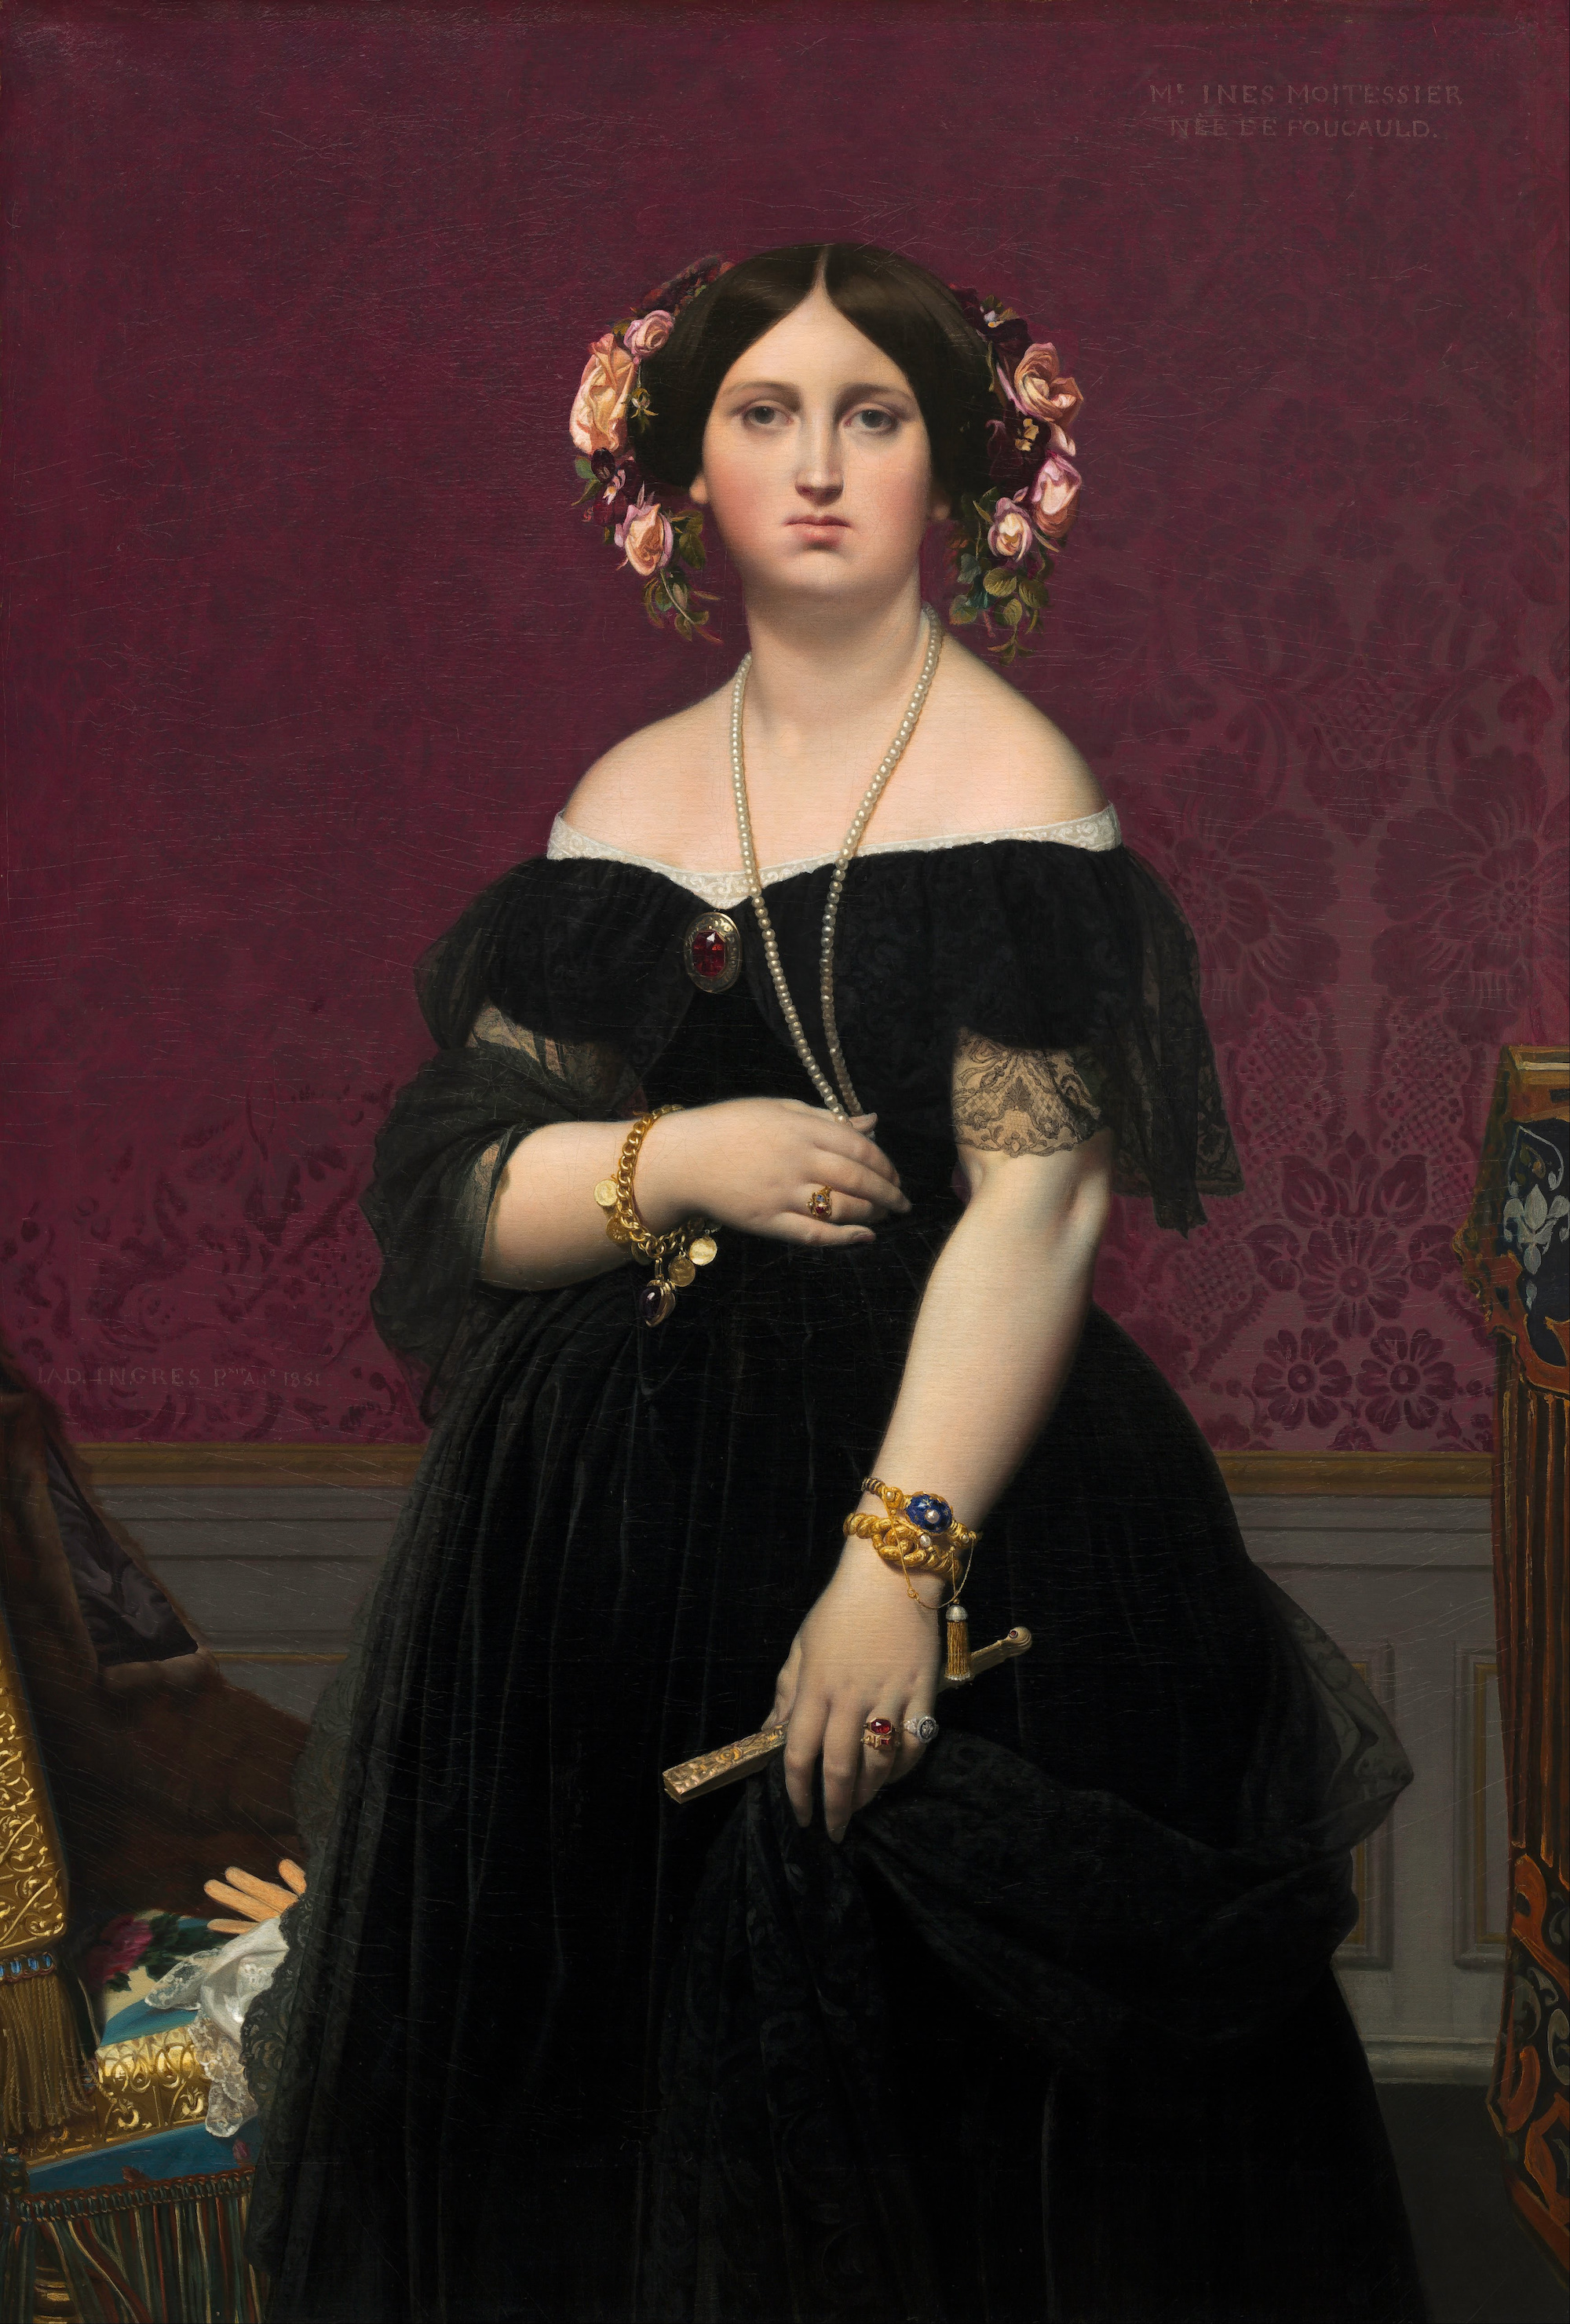 Madame Moitessier by Jean-Auguste-Dominique Ingres - 1851 - 100 x 147 cm National Gallery of Art